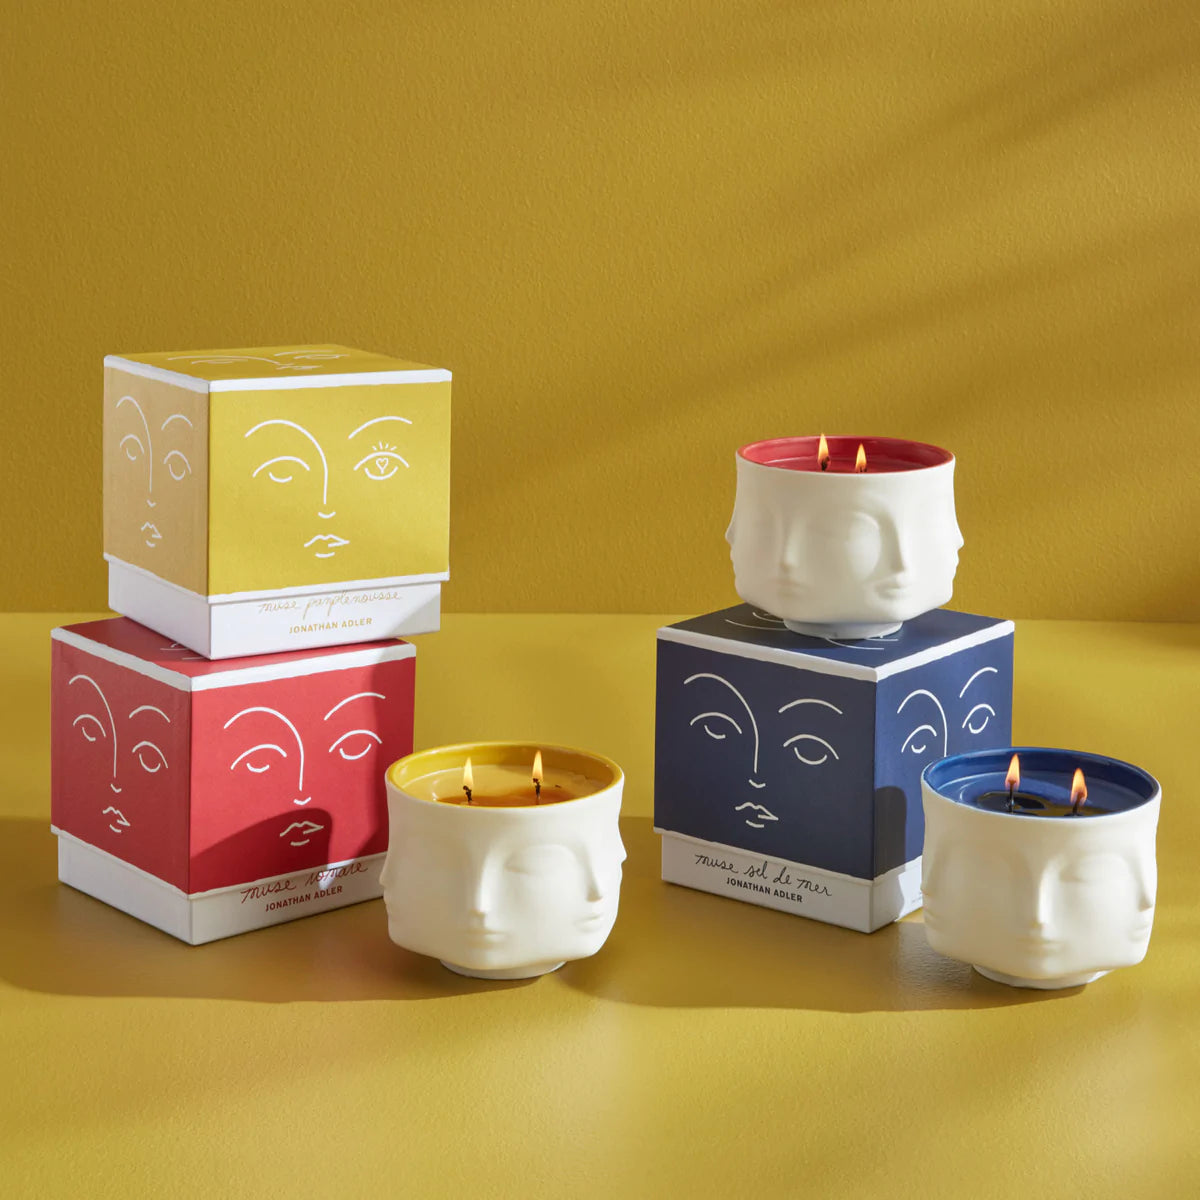 Muse Couleur Pamplemousse Candle. Jonathan Adler